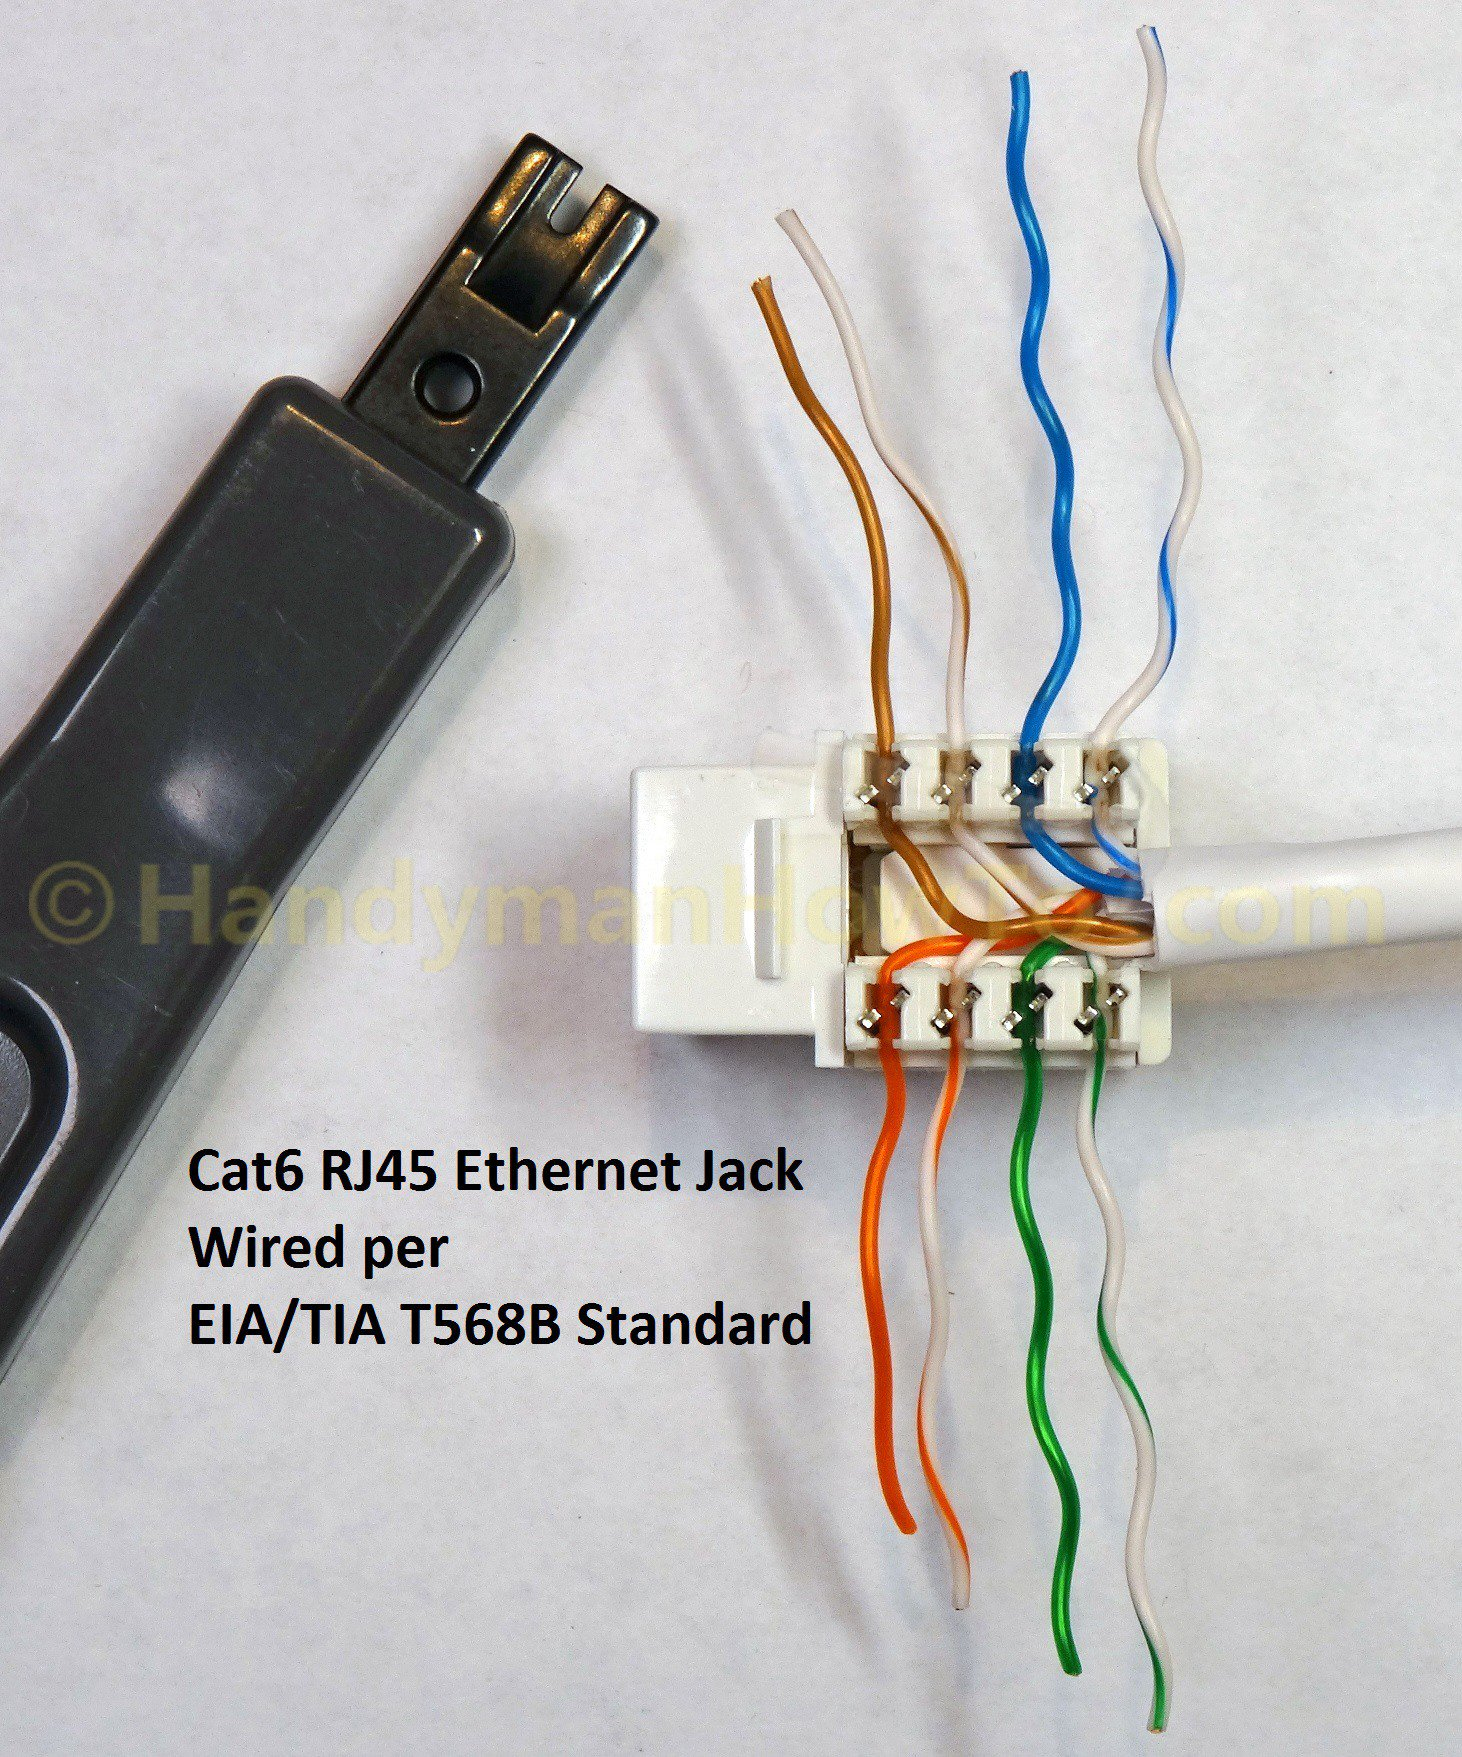 Cat 6 Wiring Diagram For Wall Plates - Cadician's Blog